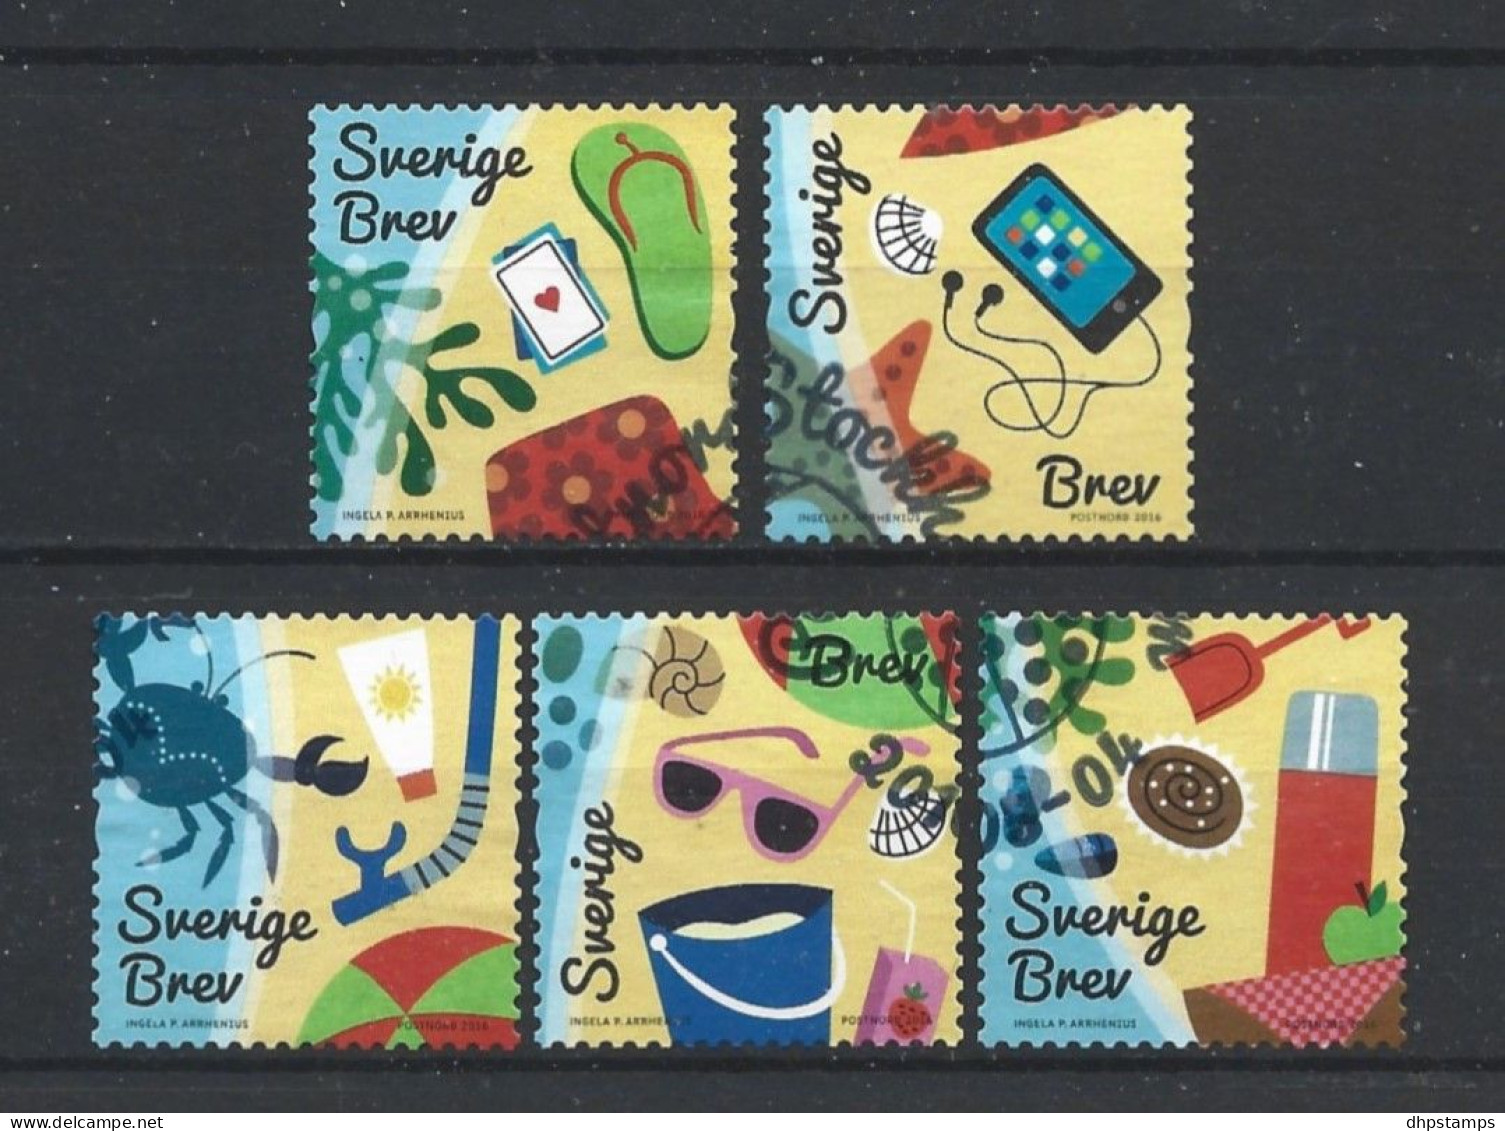 Sweden 2016 Holidays Y.T. 3093/3097 (0) - Used Stamps